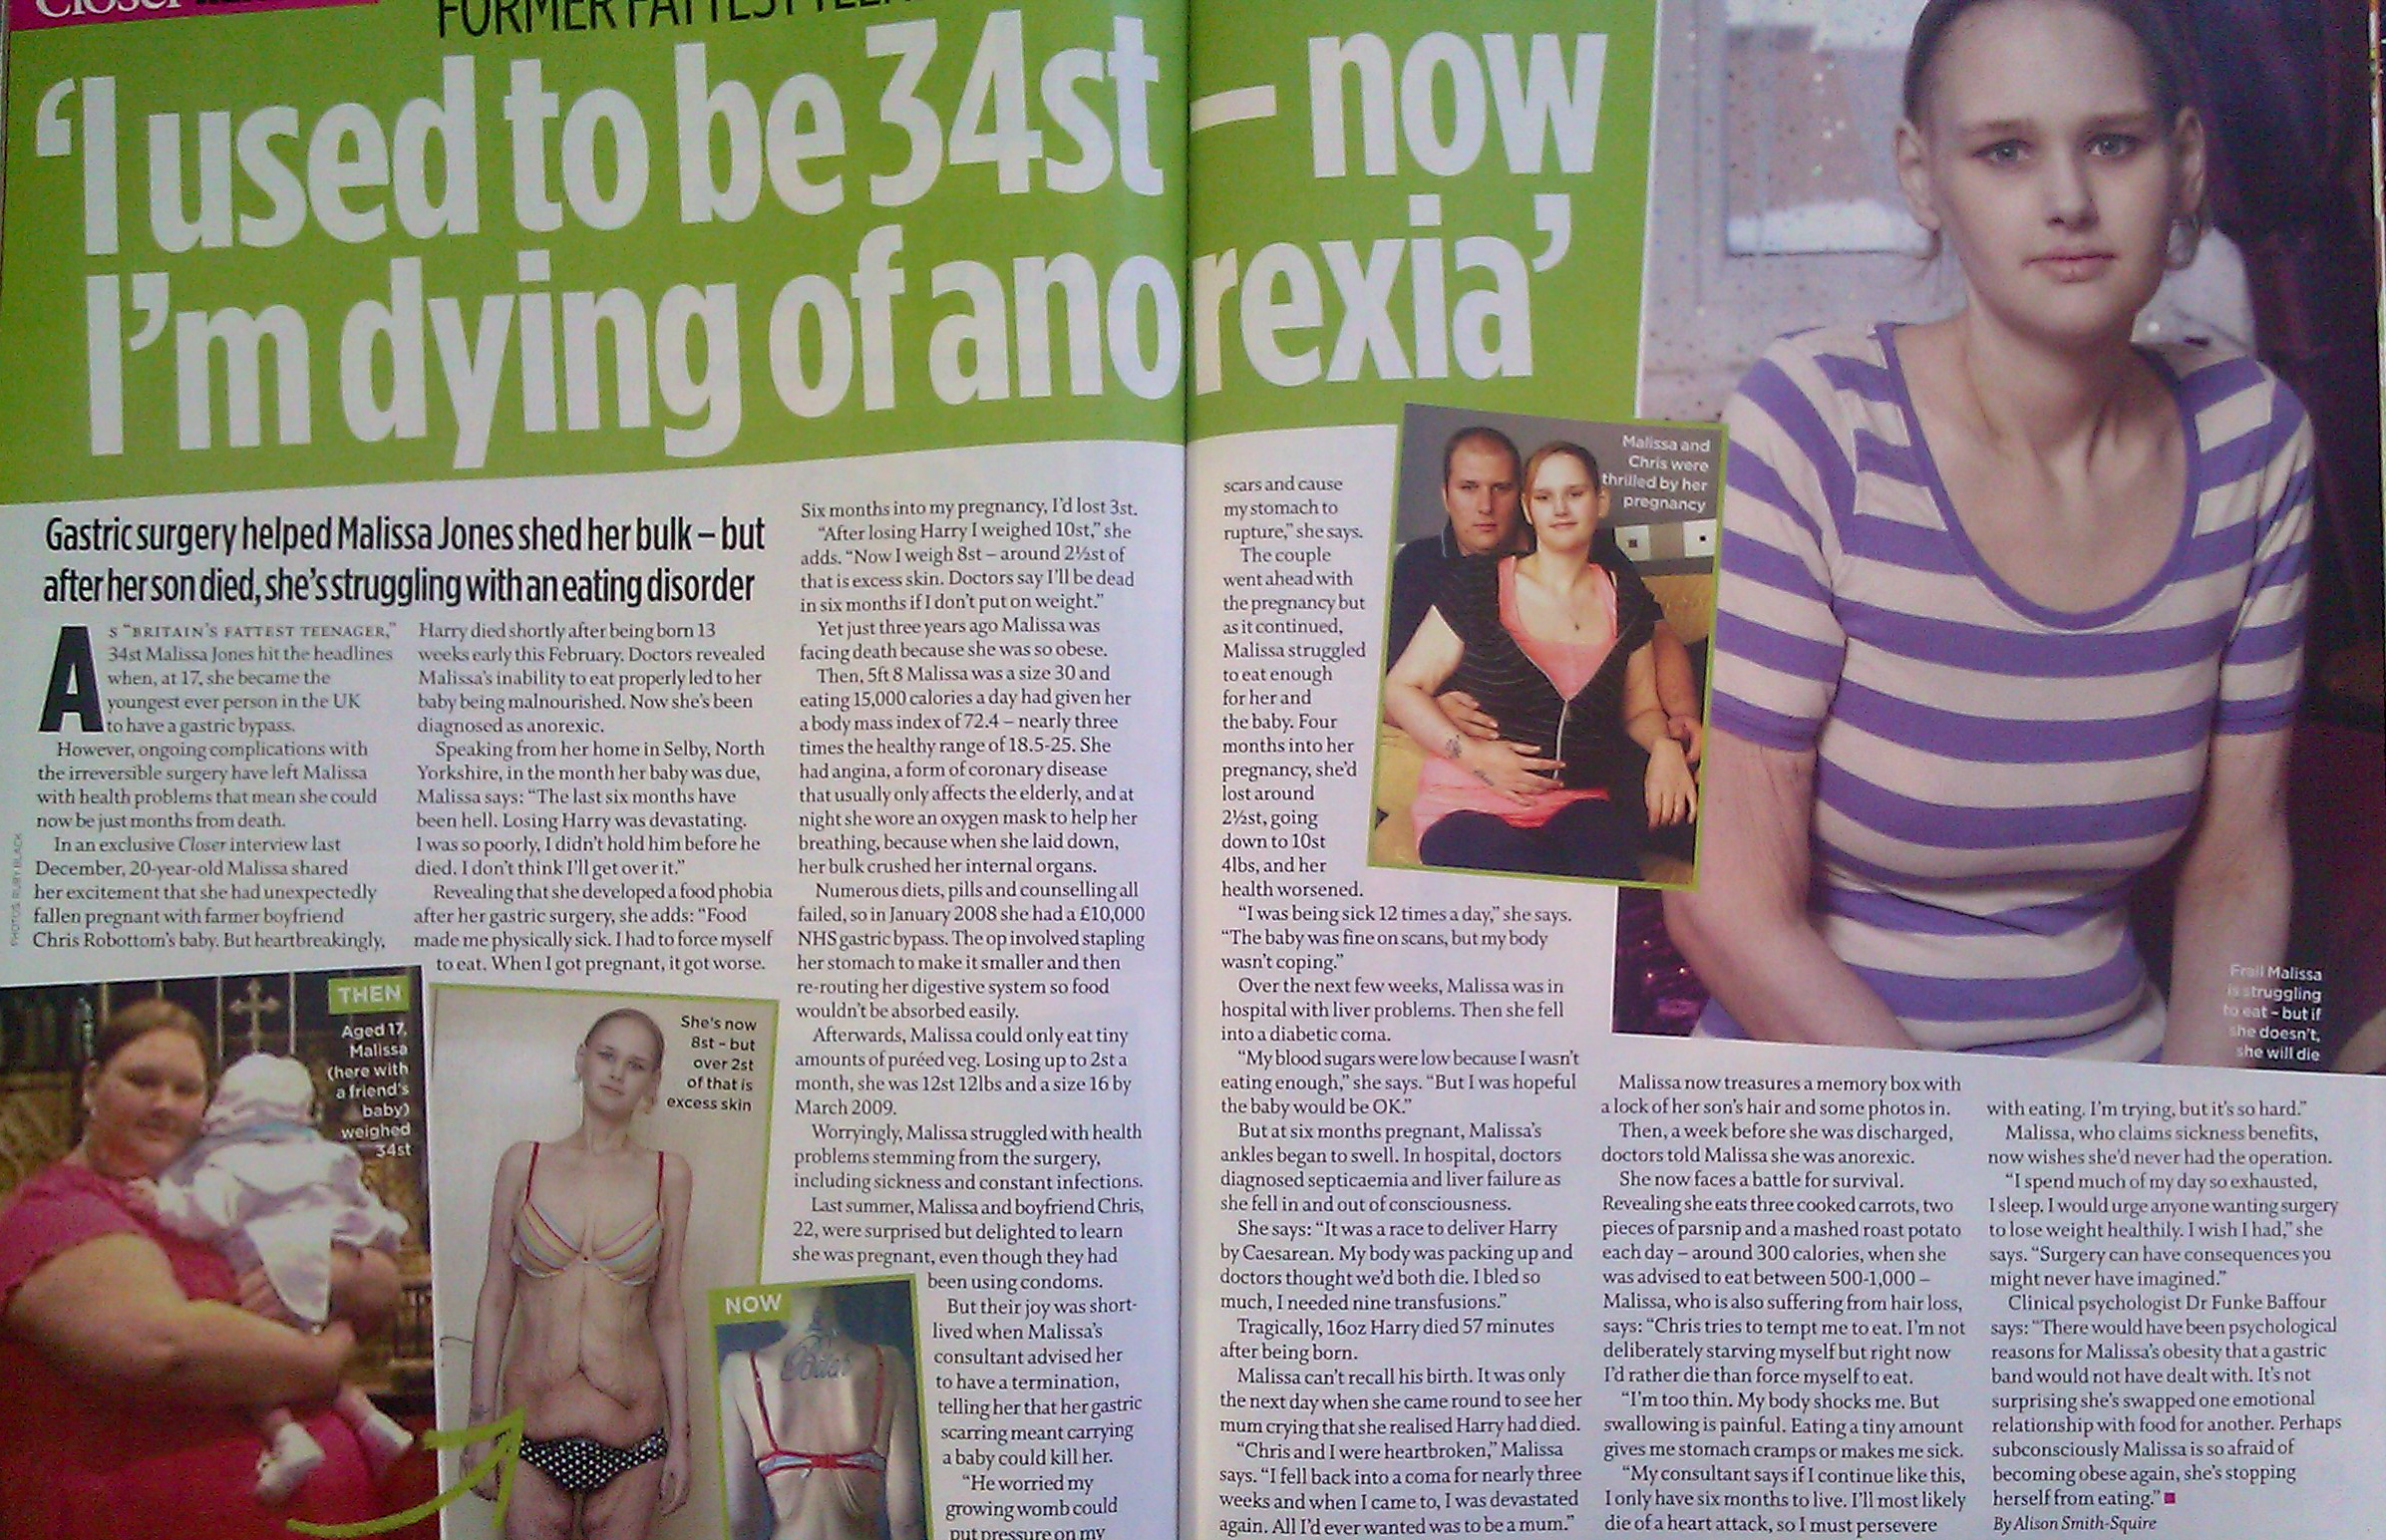 Malissa once weighed 34 st - now she's dying from anorexia